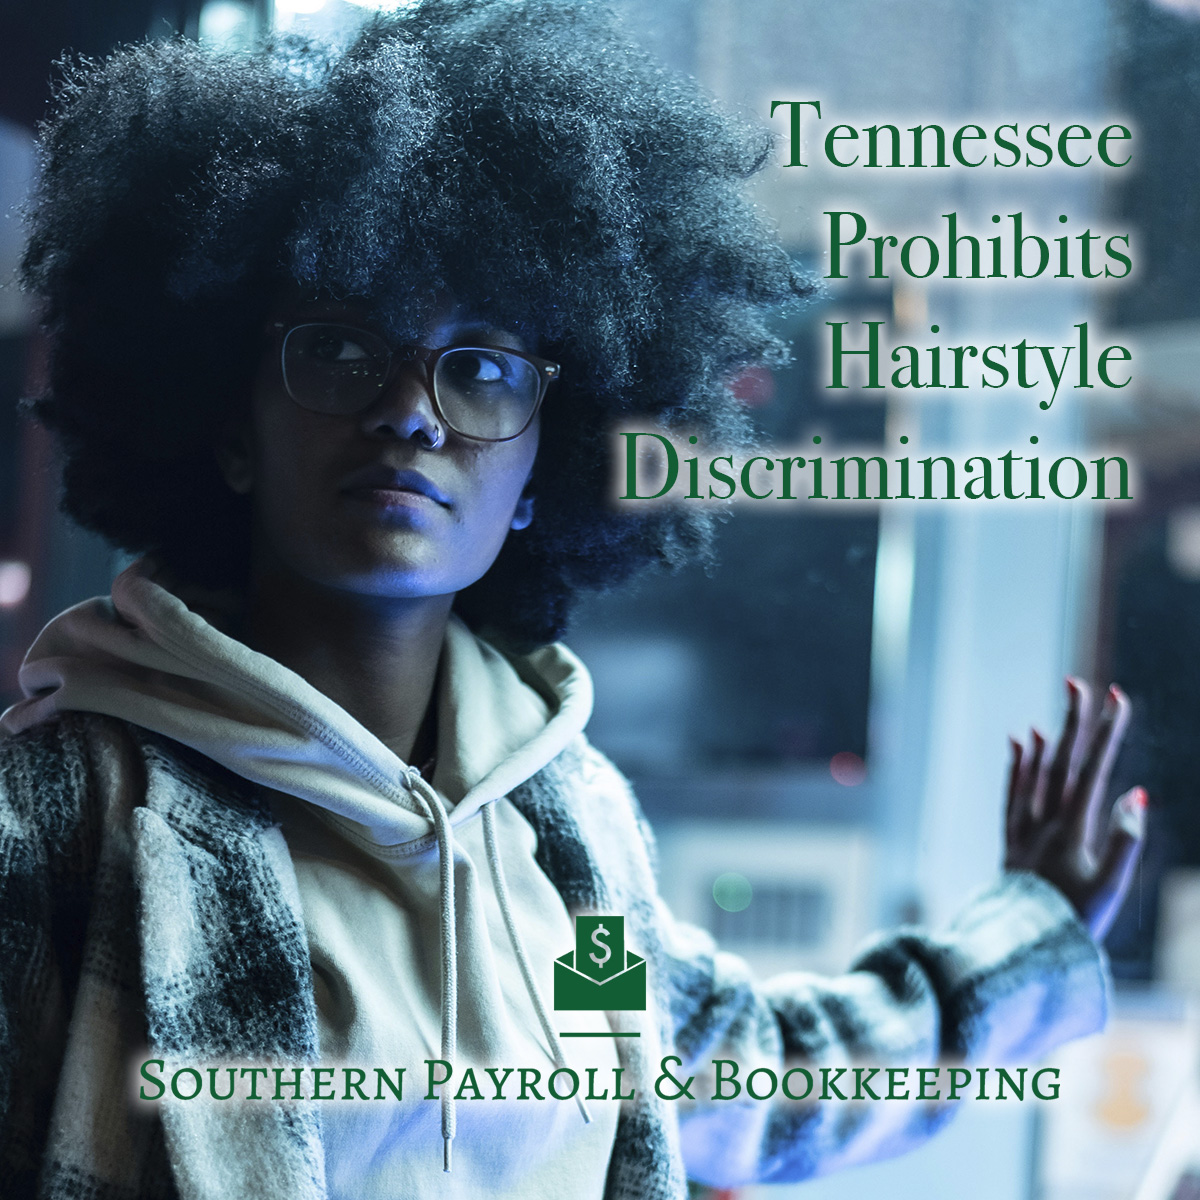 ￼Tennessee Prohibits Hairstyle Discrimination